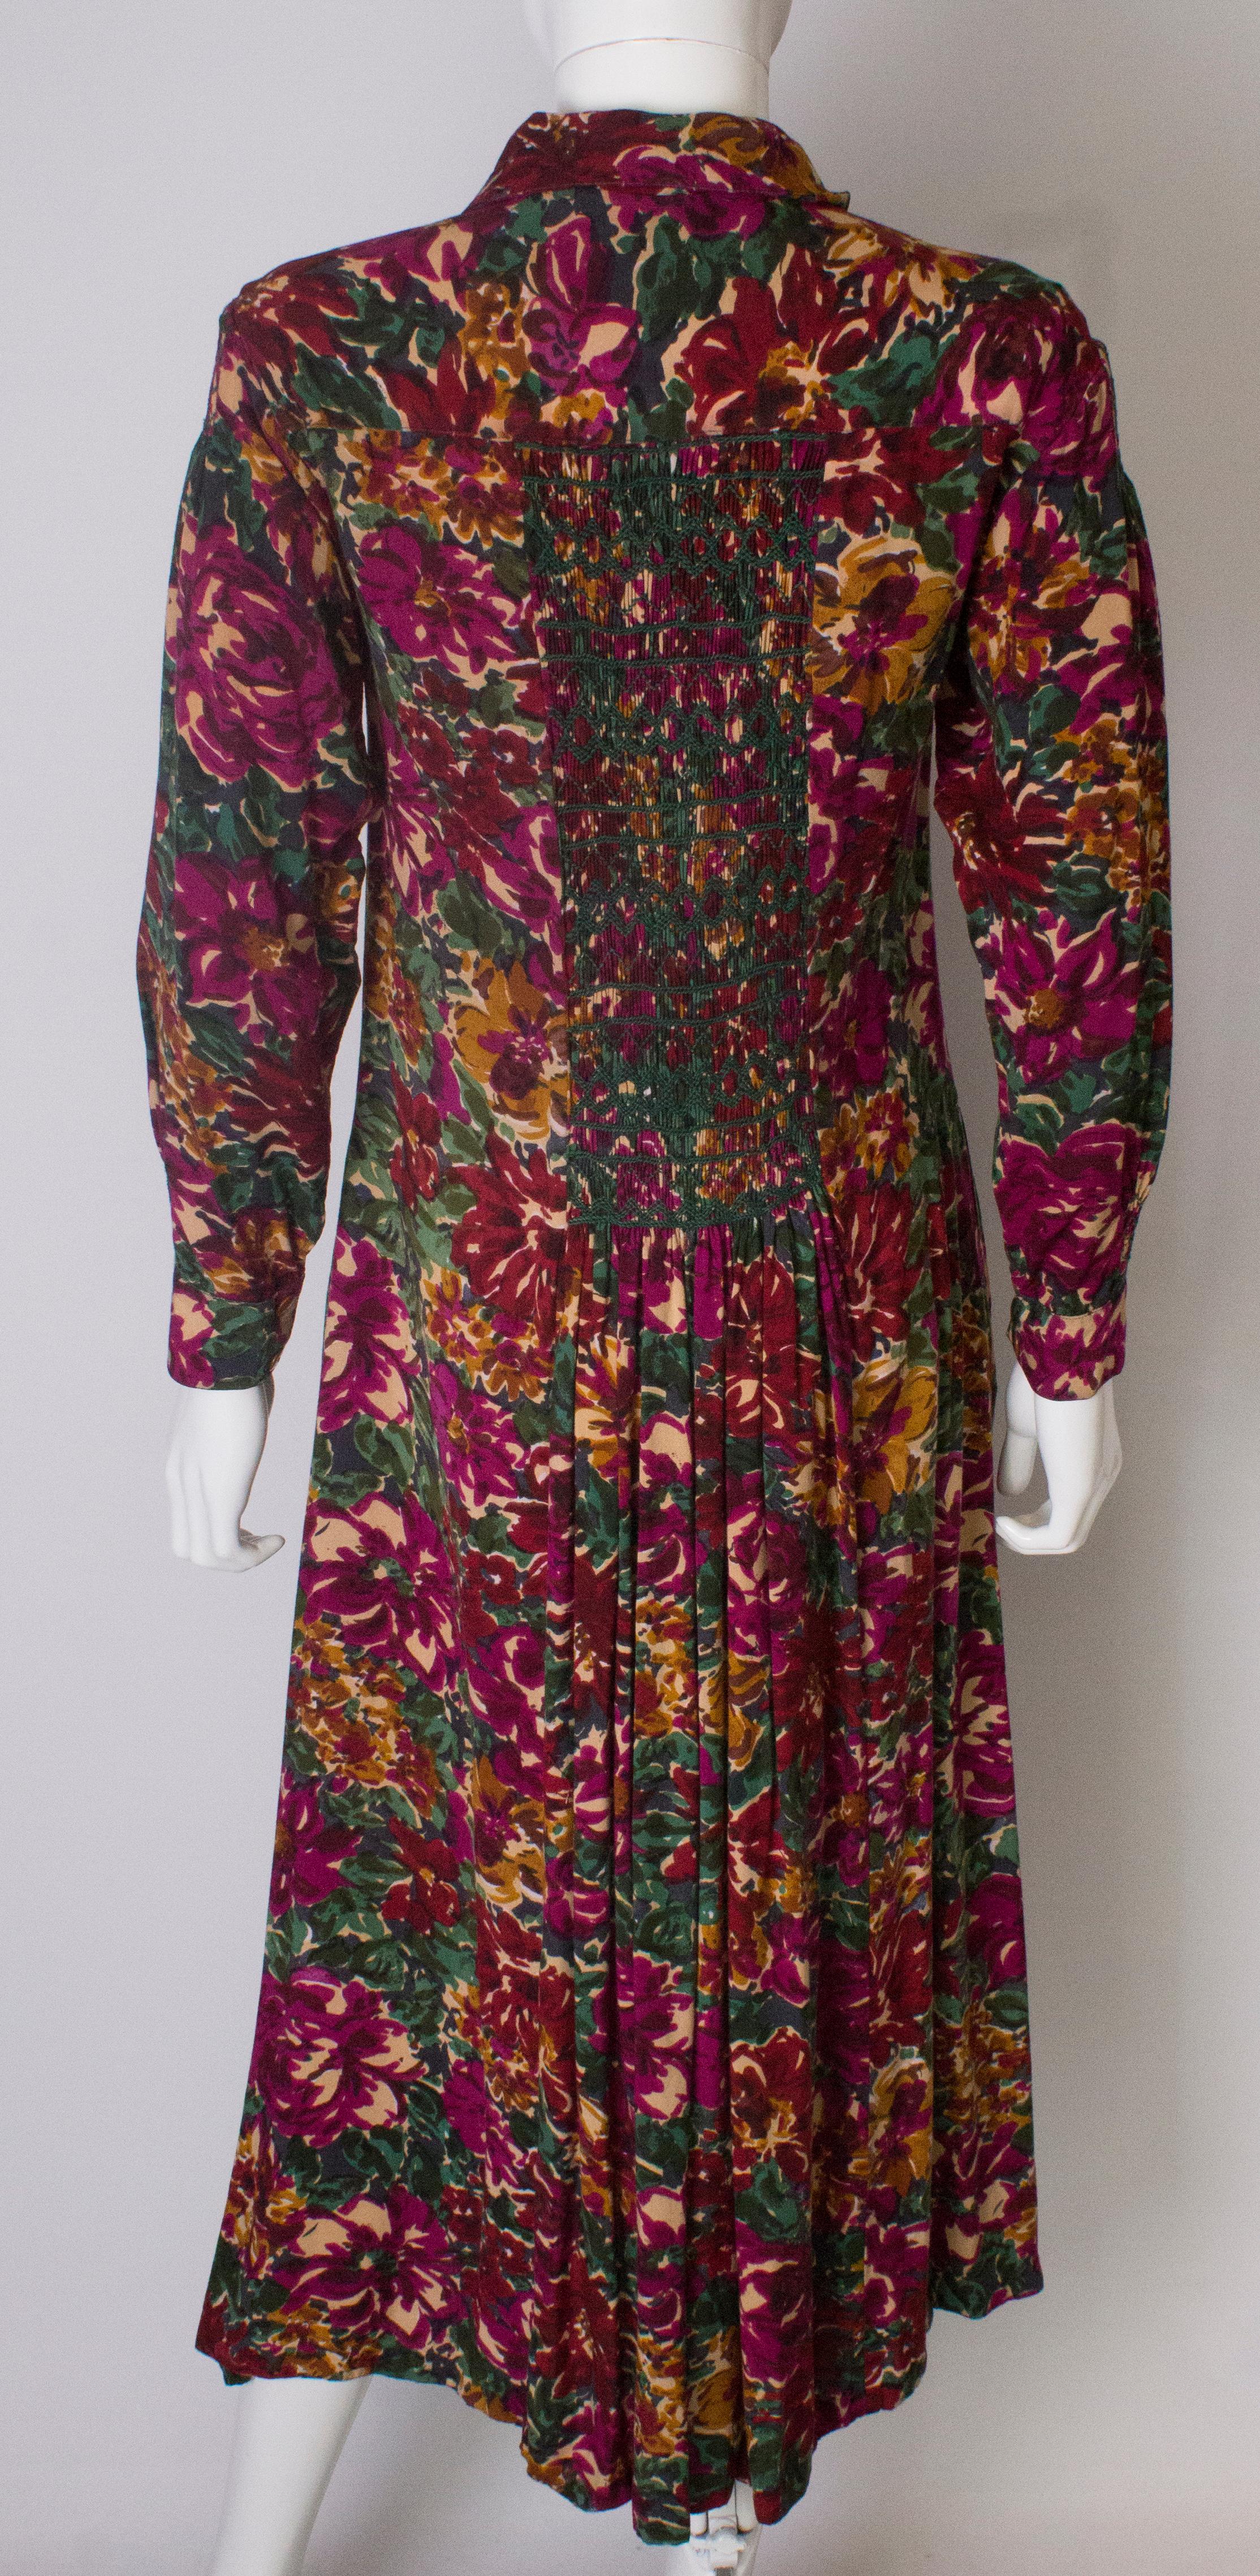 A vintage 1970s floral printed cotton day dress by Monsson 2